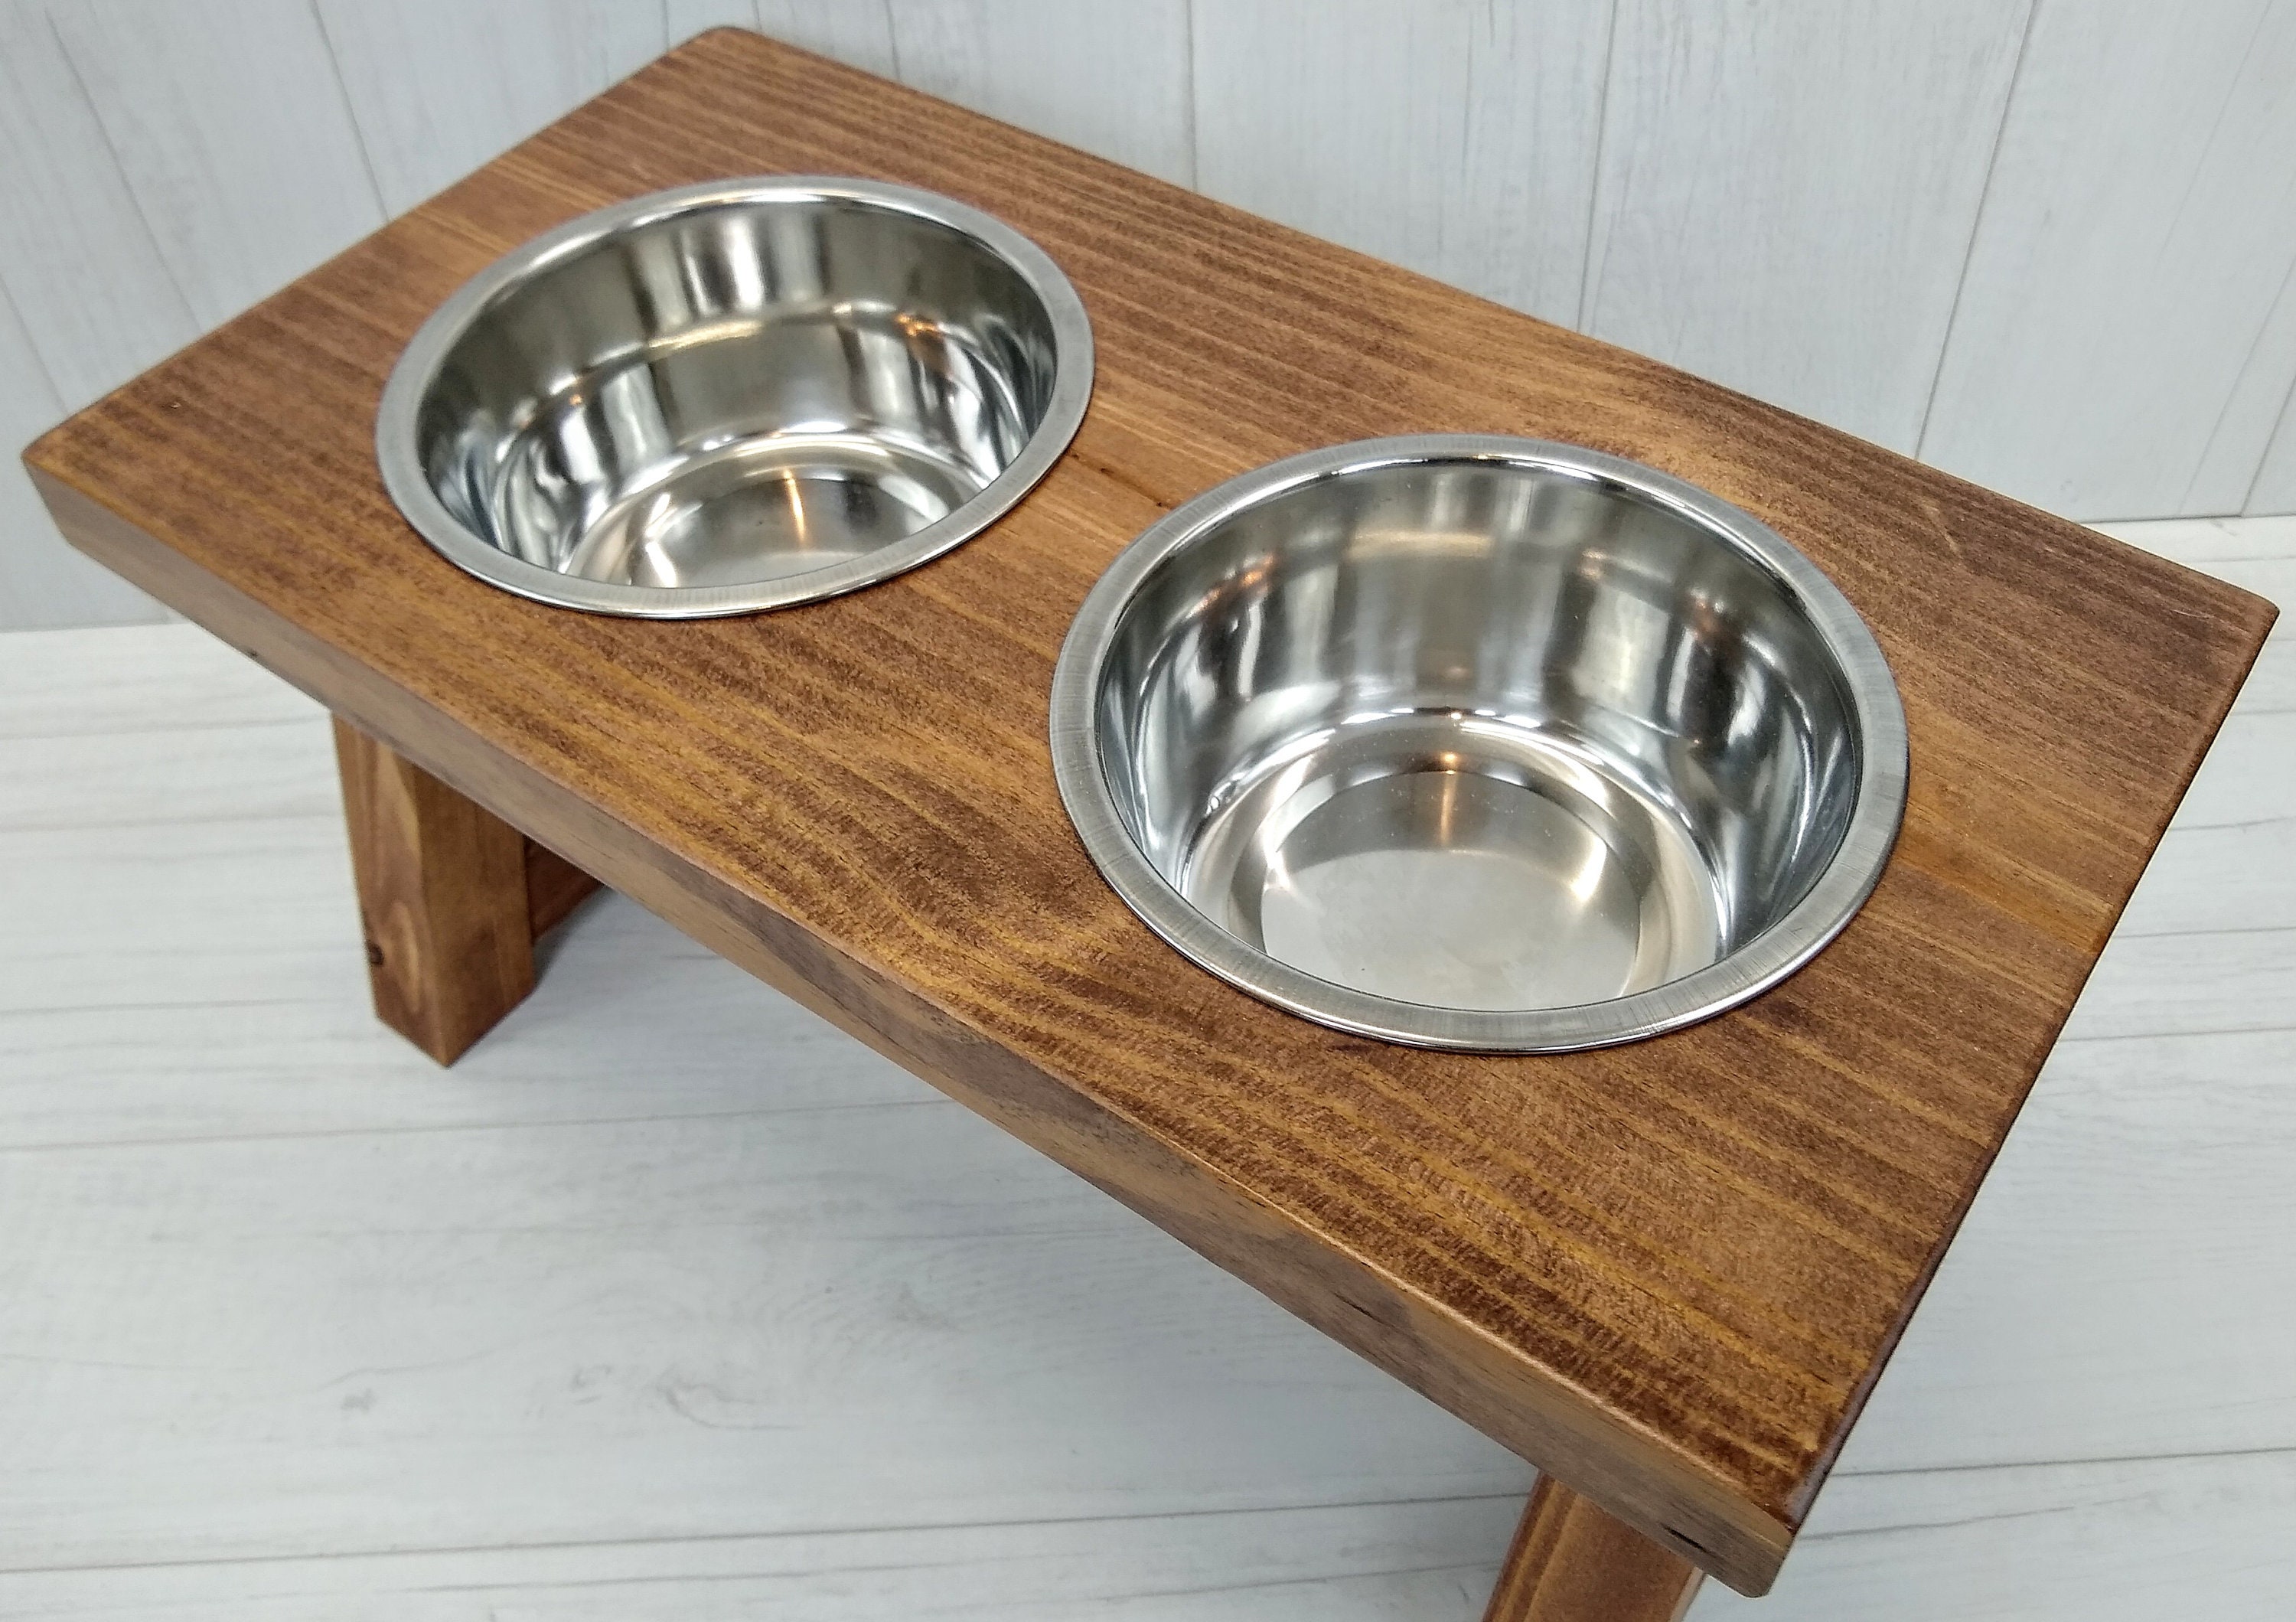 Large Handmade Elevated Double Dog Bowl Stand – Solid Wood